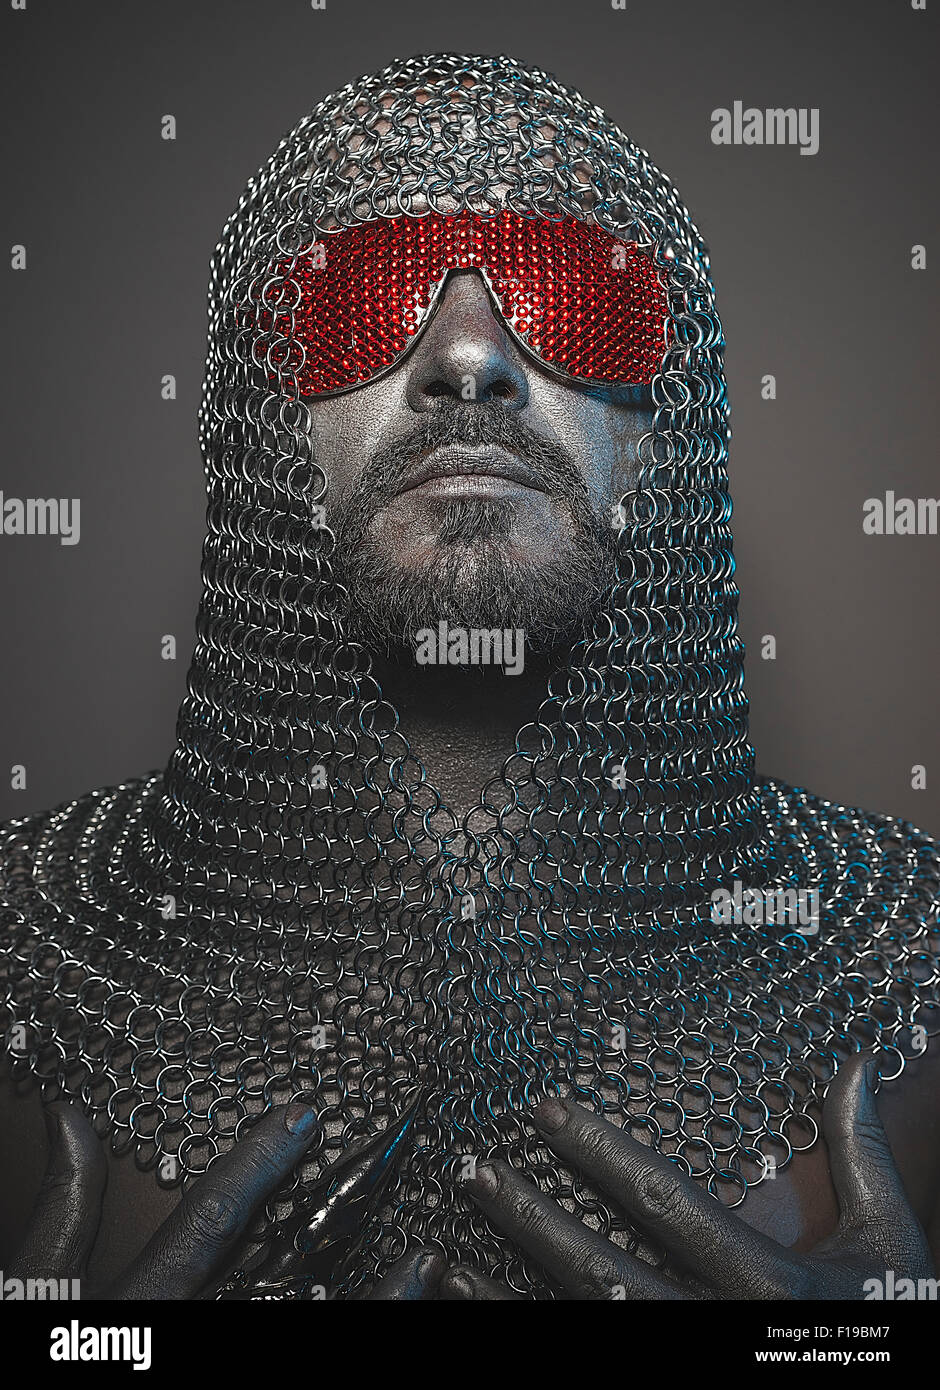 medieval executioner mesh iron rings on the head Stock Photo